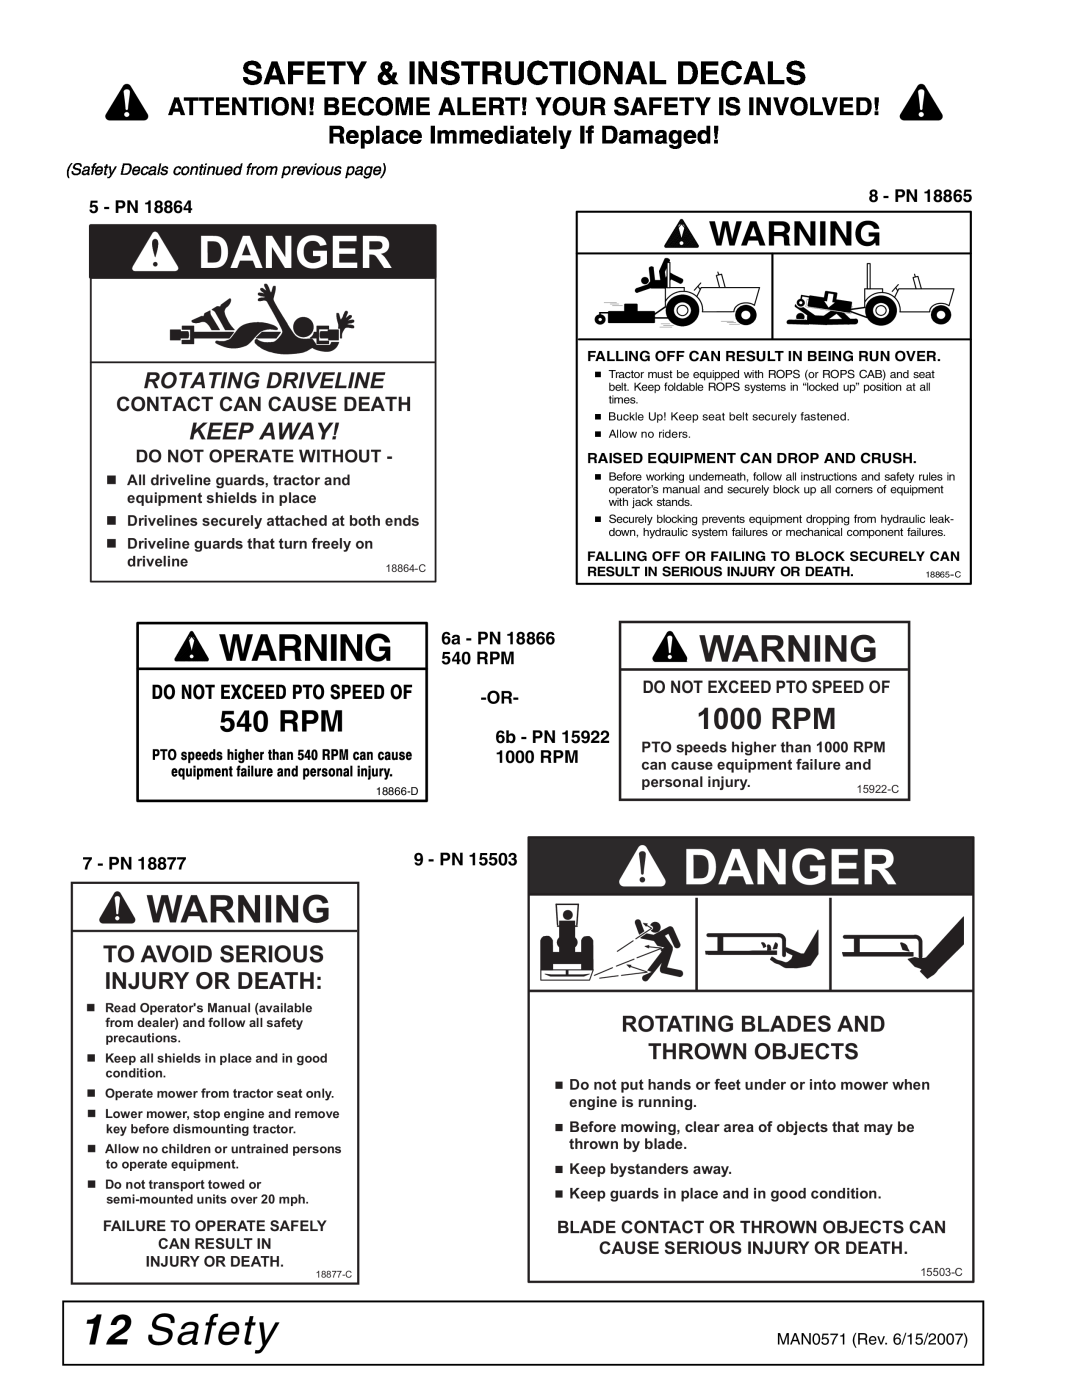 Woods Equipment DSO1260Q Danger, Safety & Instructional Decals, 1000 RPM, Replace Immediately If Damaged, Keep Away 